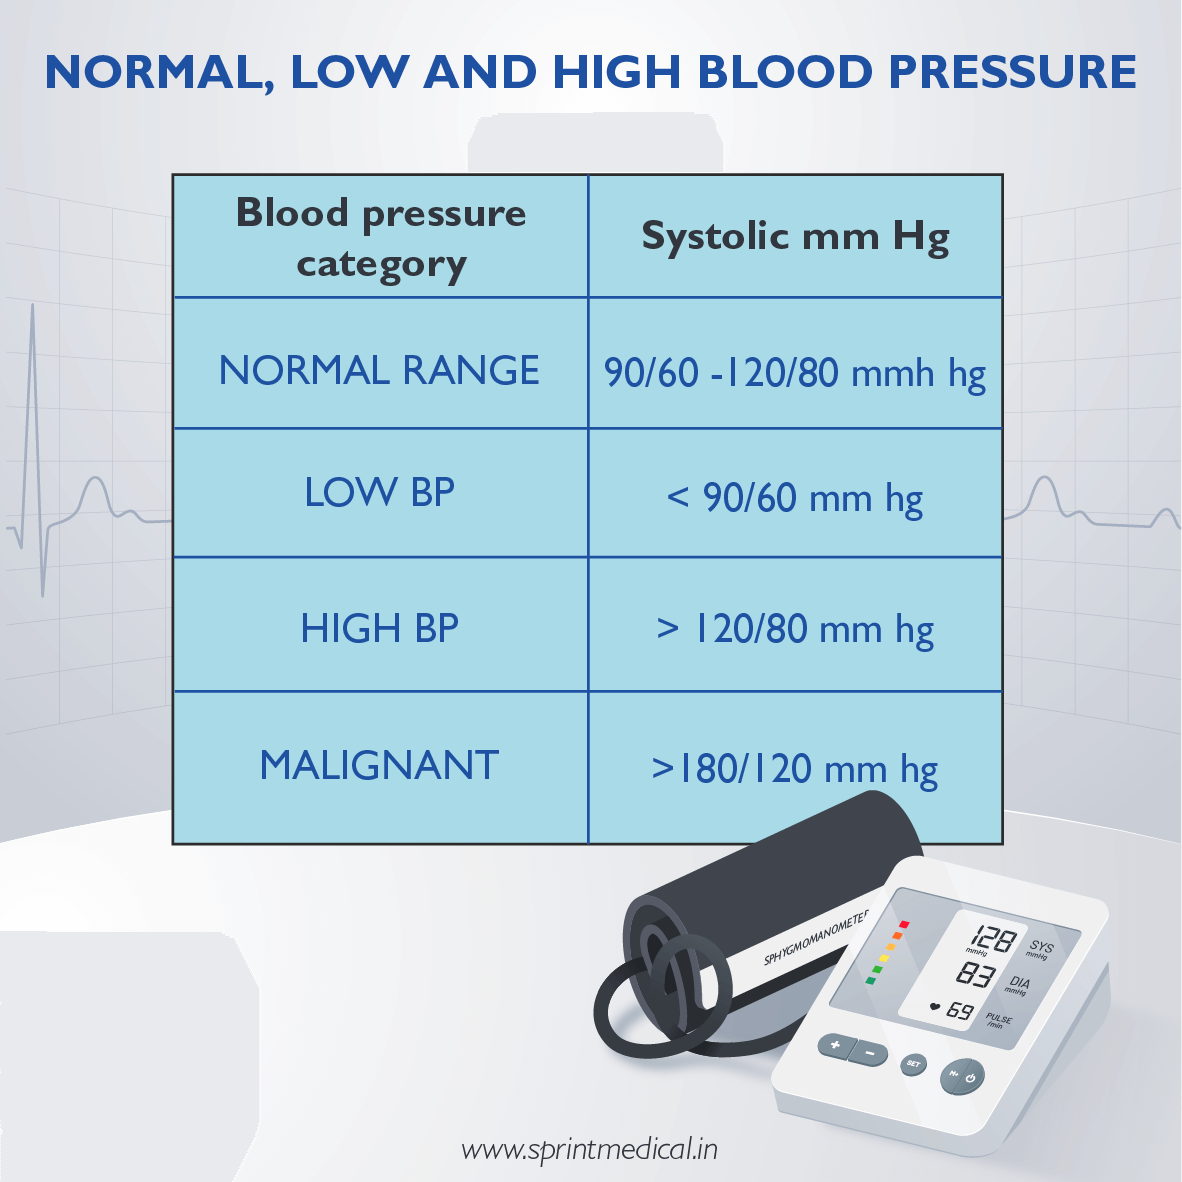 Normal, low, high and malignant blood pressure range